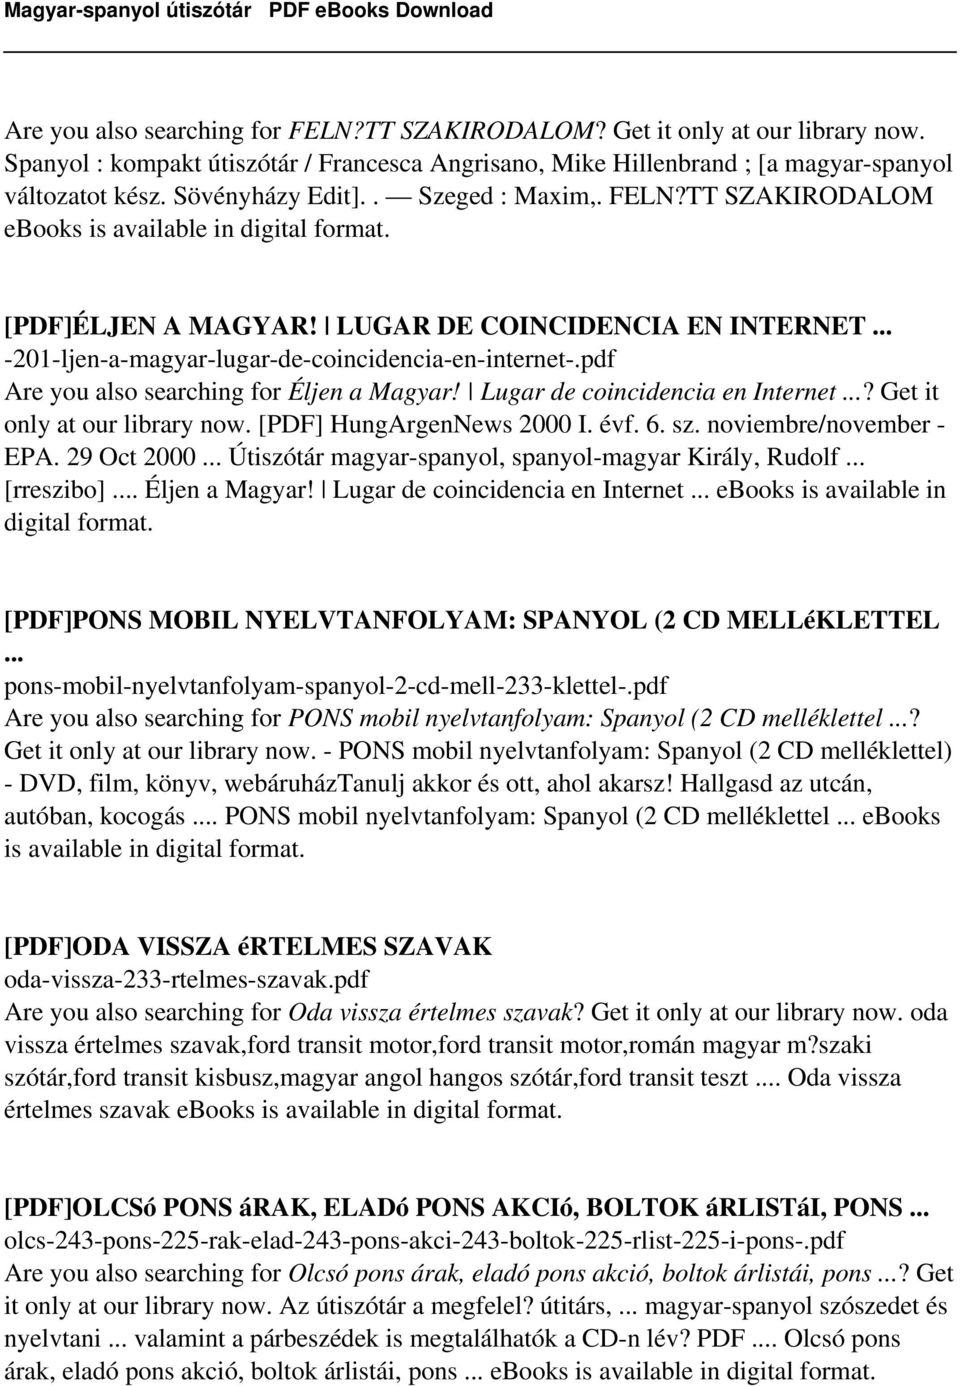 pdf Are you also searching for Éljen a Magyar! Lugar de coincidencia en Internet...? Get it only at our library now. [PDF] HungArgenNews 2000 I. évf. 6. sz. noviembre/november - EPA. 29 Oct 2000.